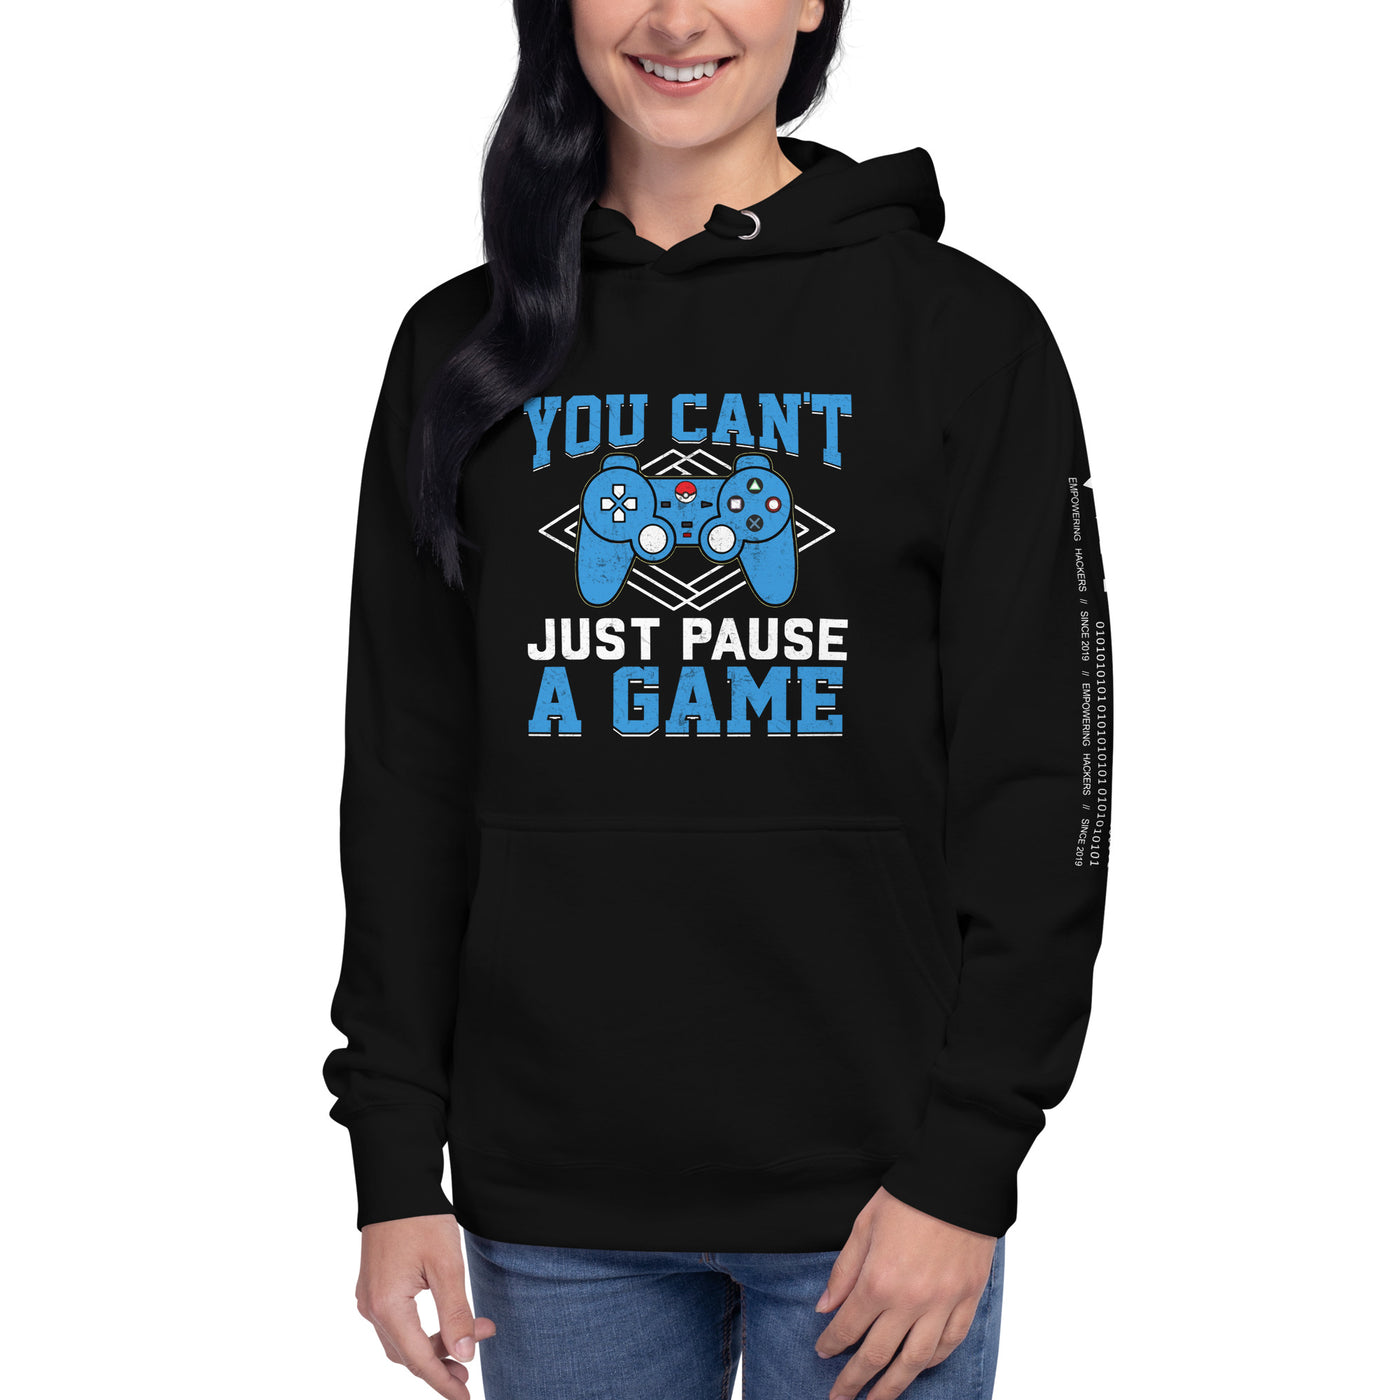 You Can't Just Pause a Game Unisex Hoodie